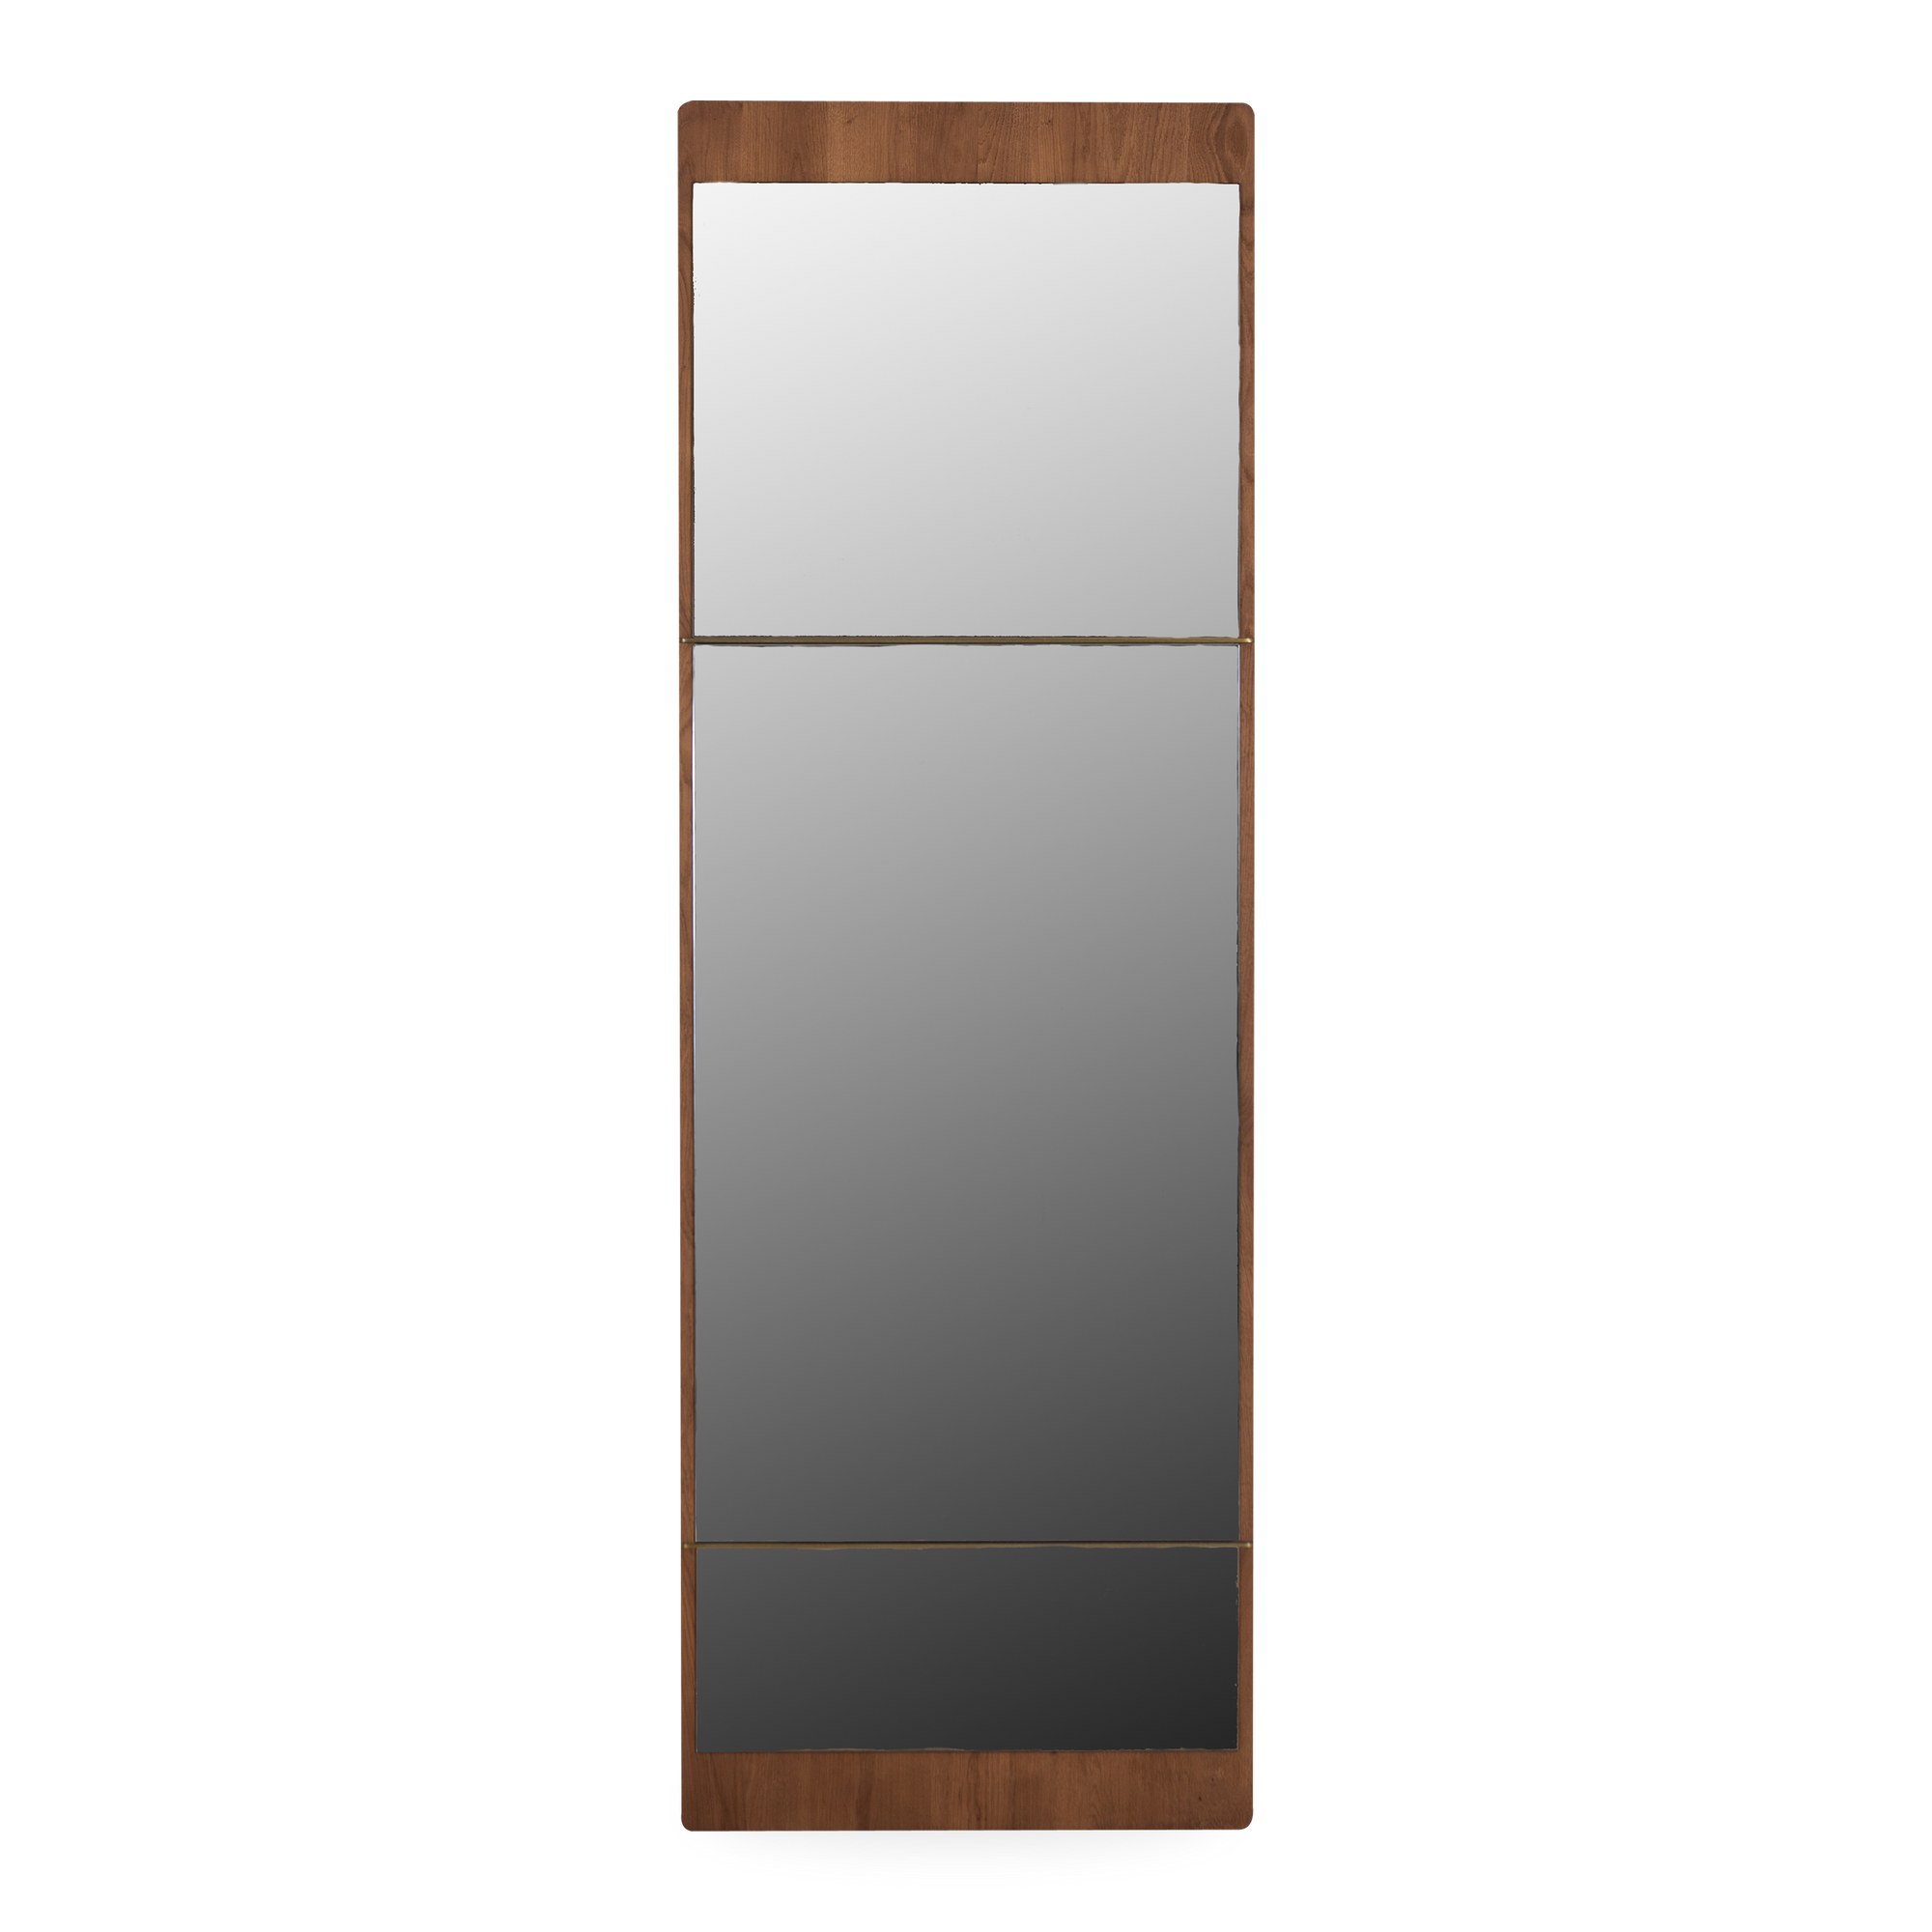 Defined by its unique sectioned design and array of brass tones, the Laurence Floor Mirror is a contemporary sectioned mirror that captivates the attention of every guest.